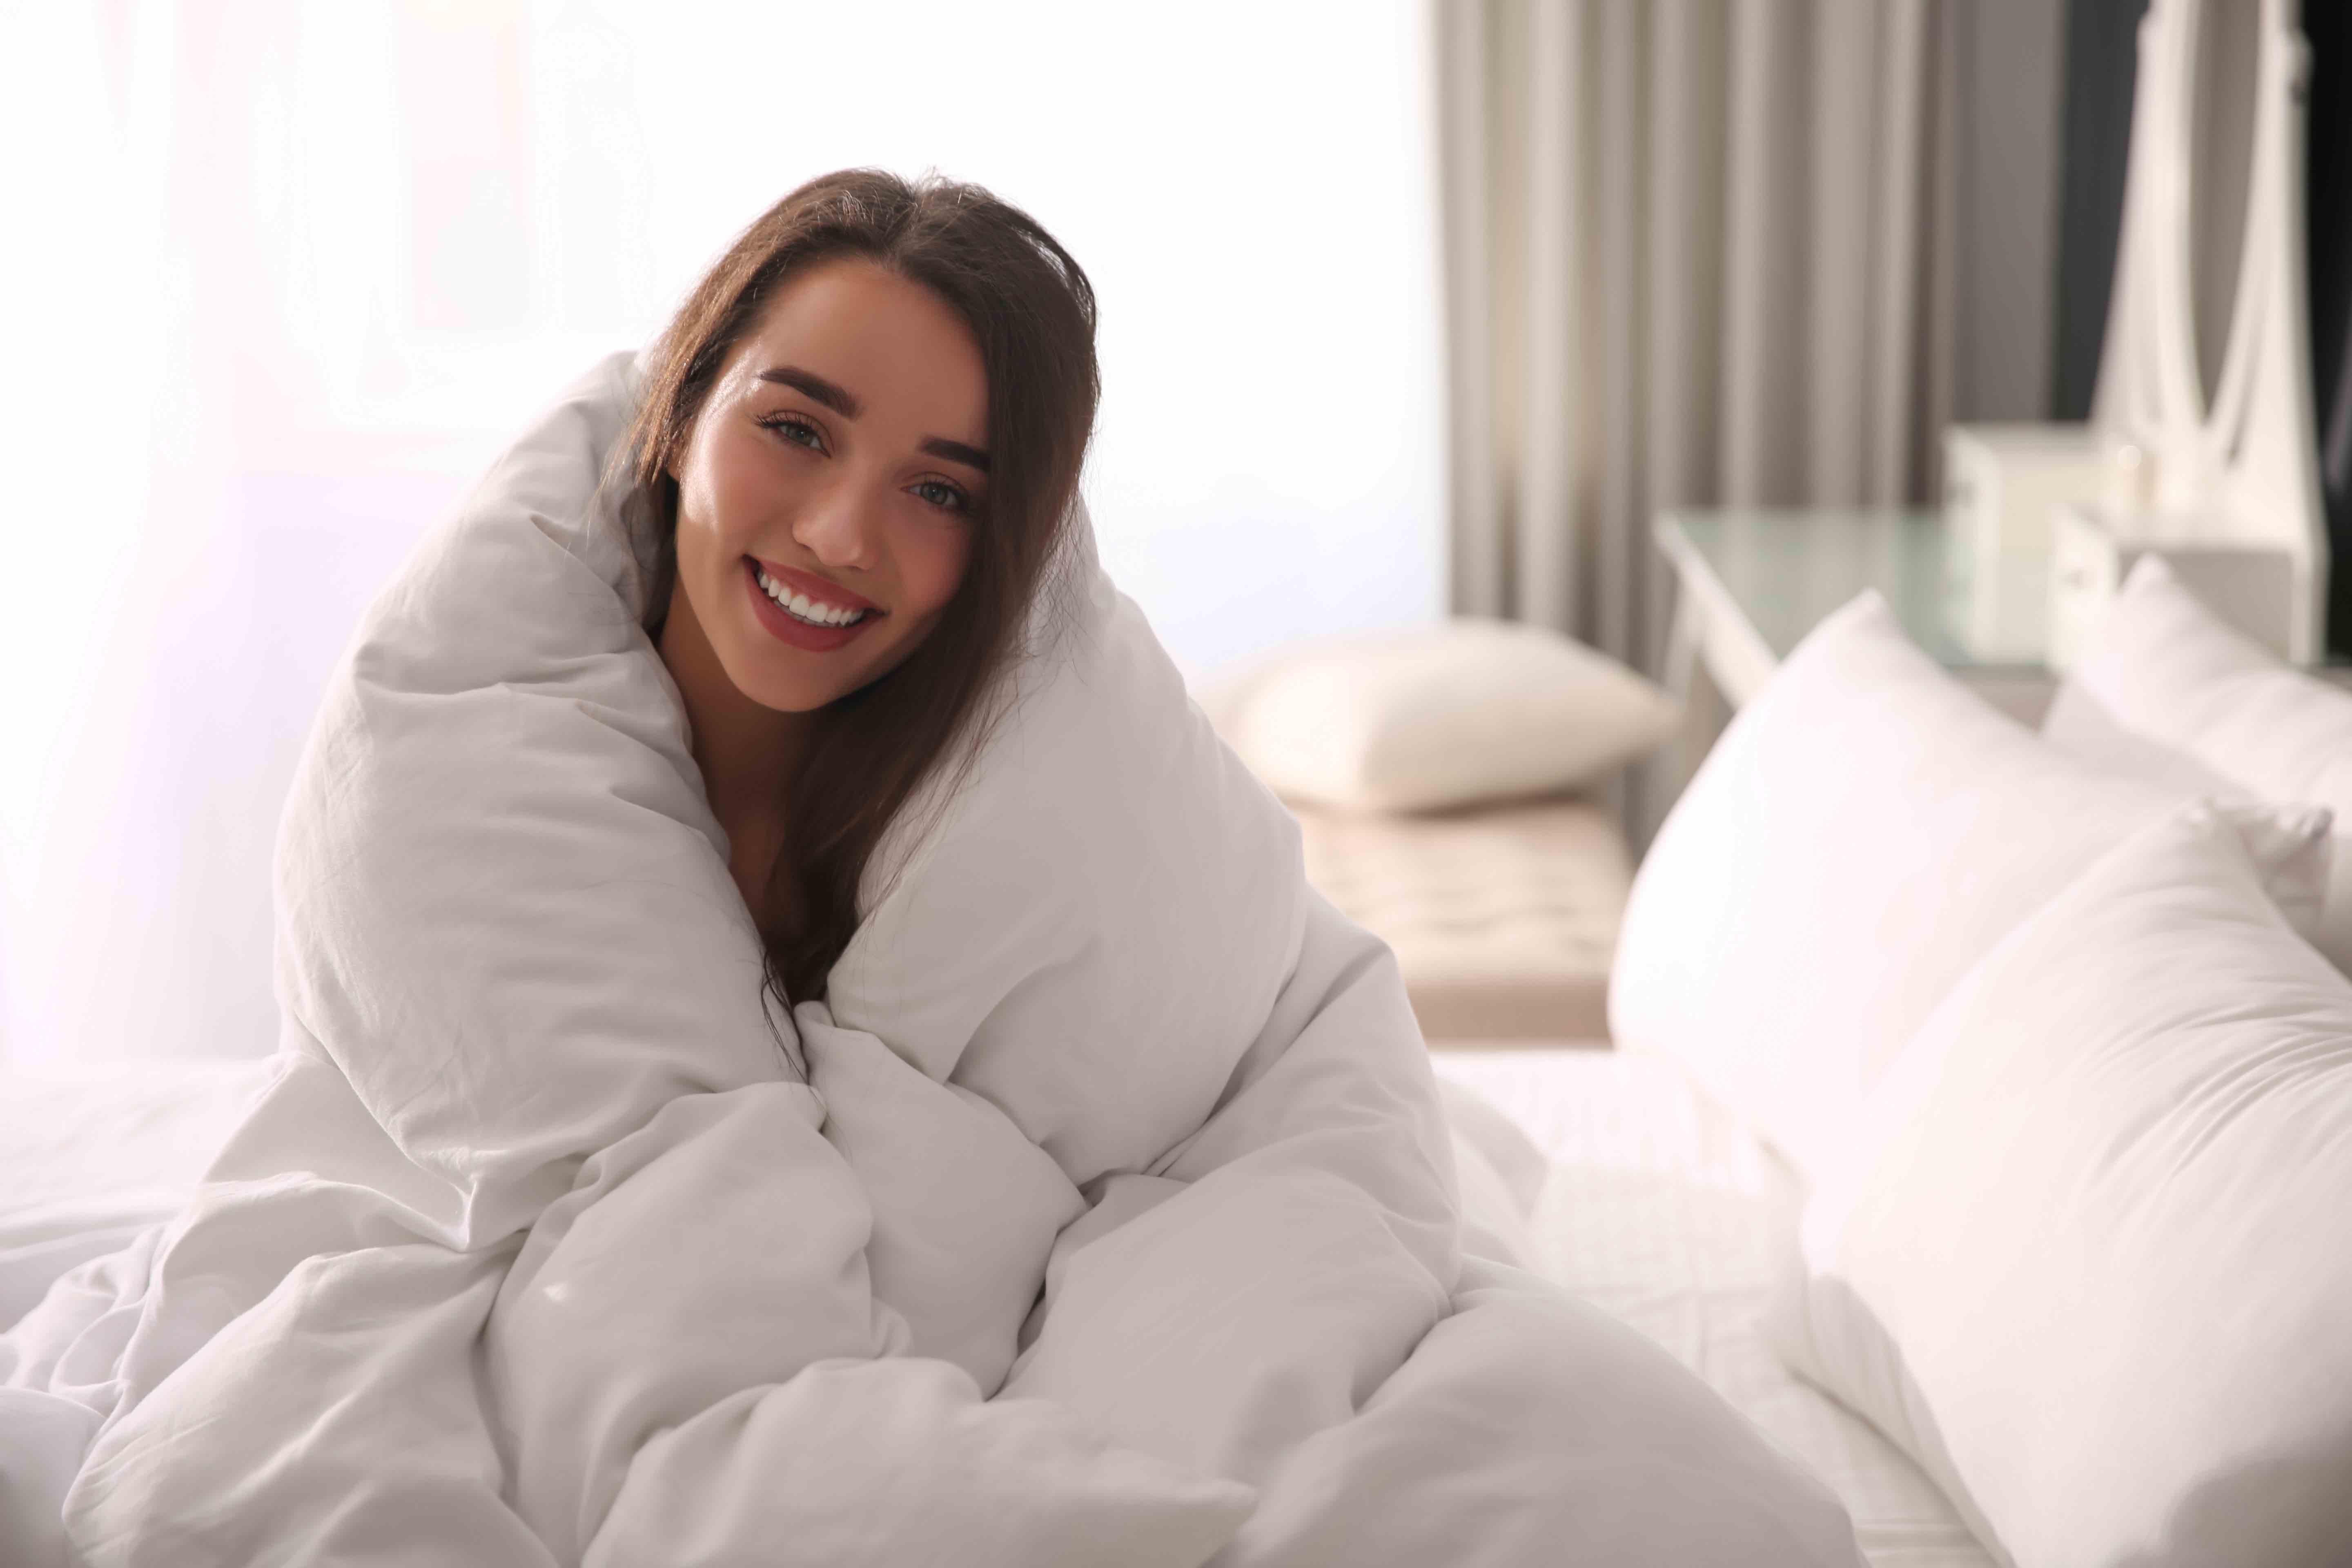 duvetsuisse-young-woman-huddled-in-duvet